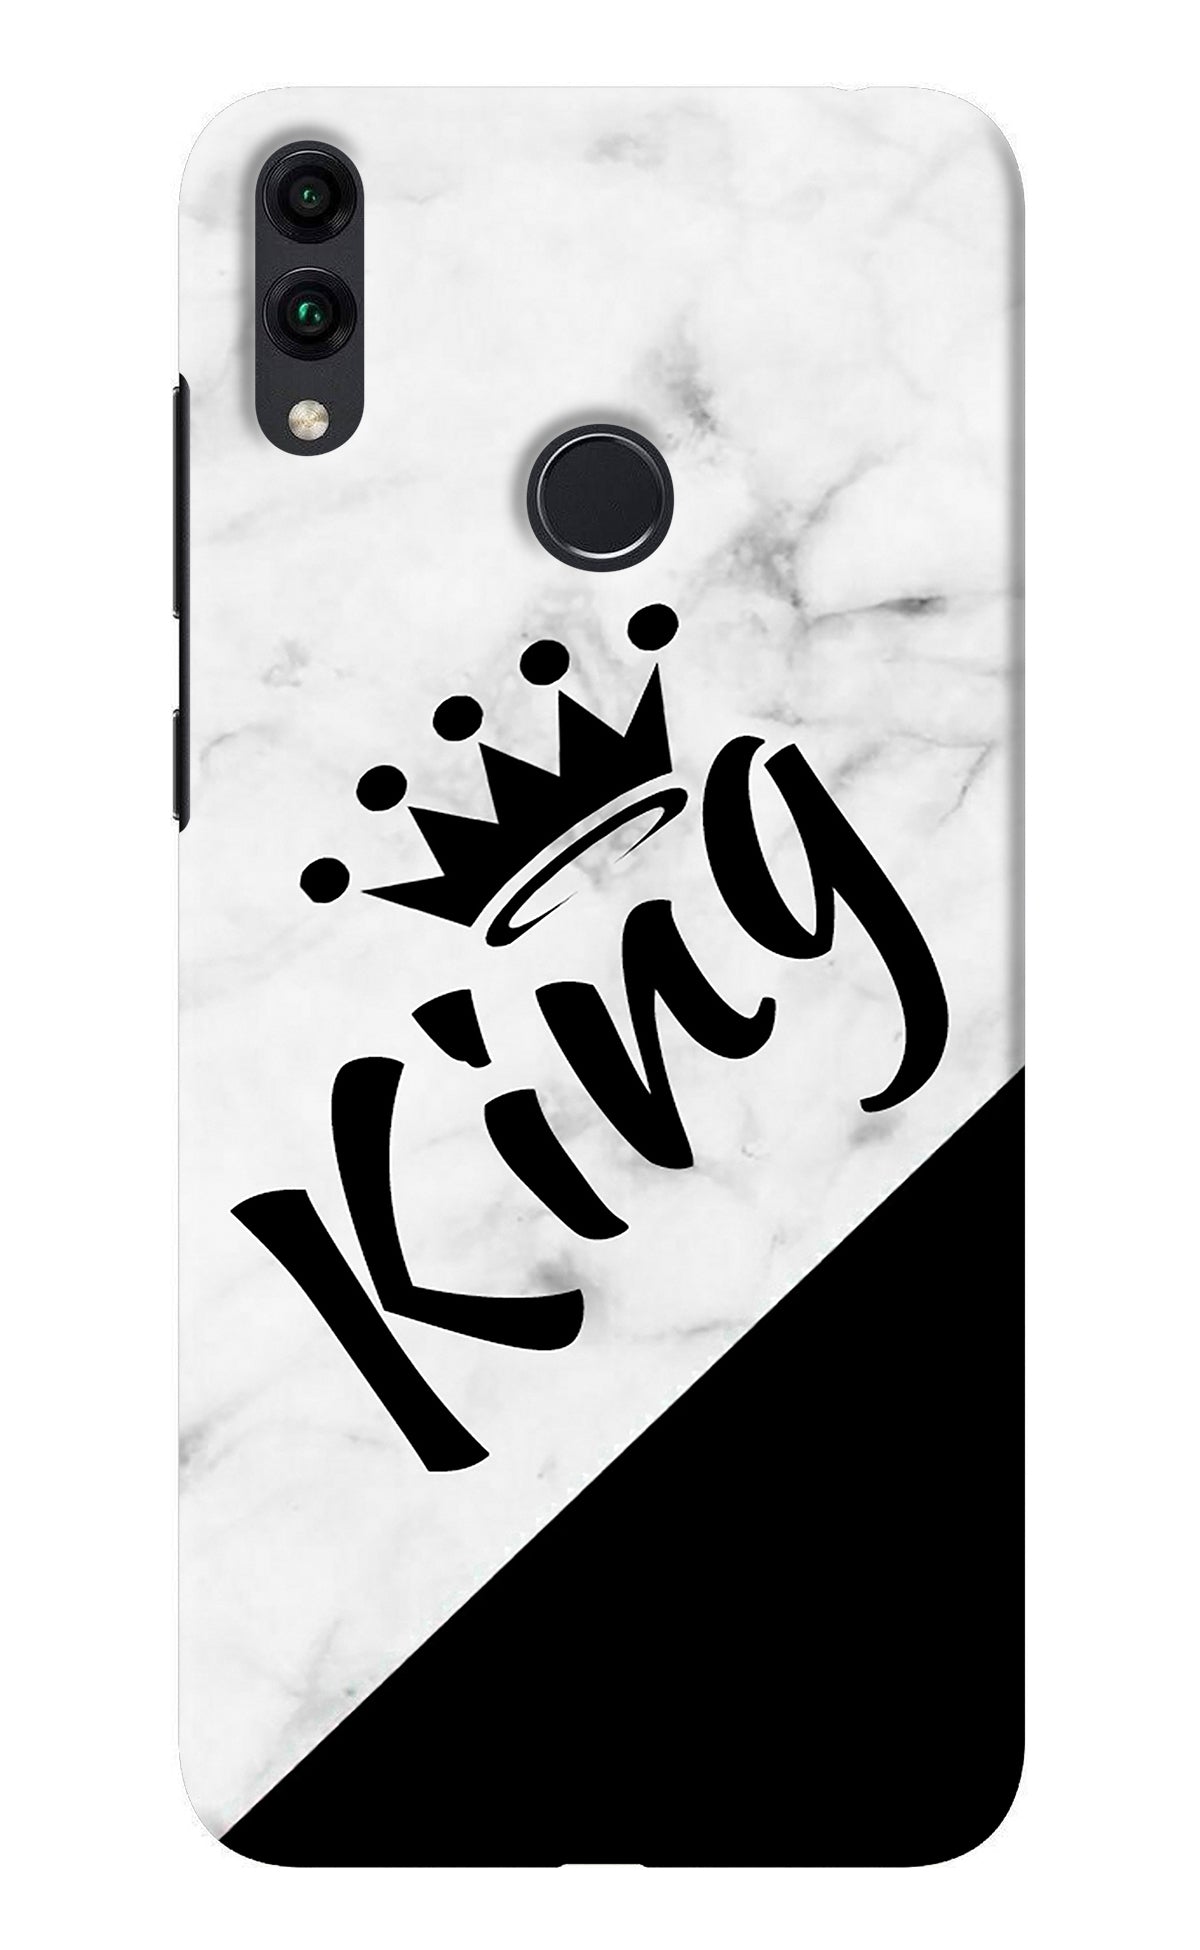 King Honor 8C Back Cover